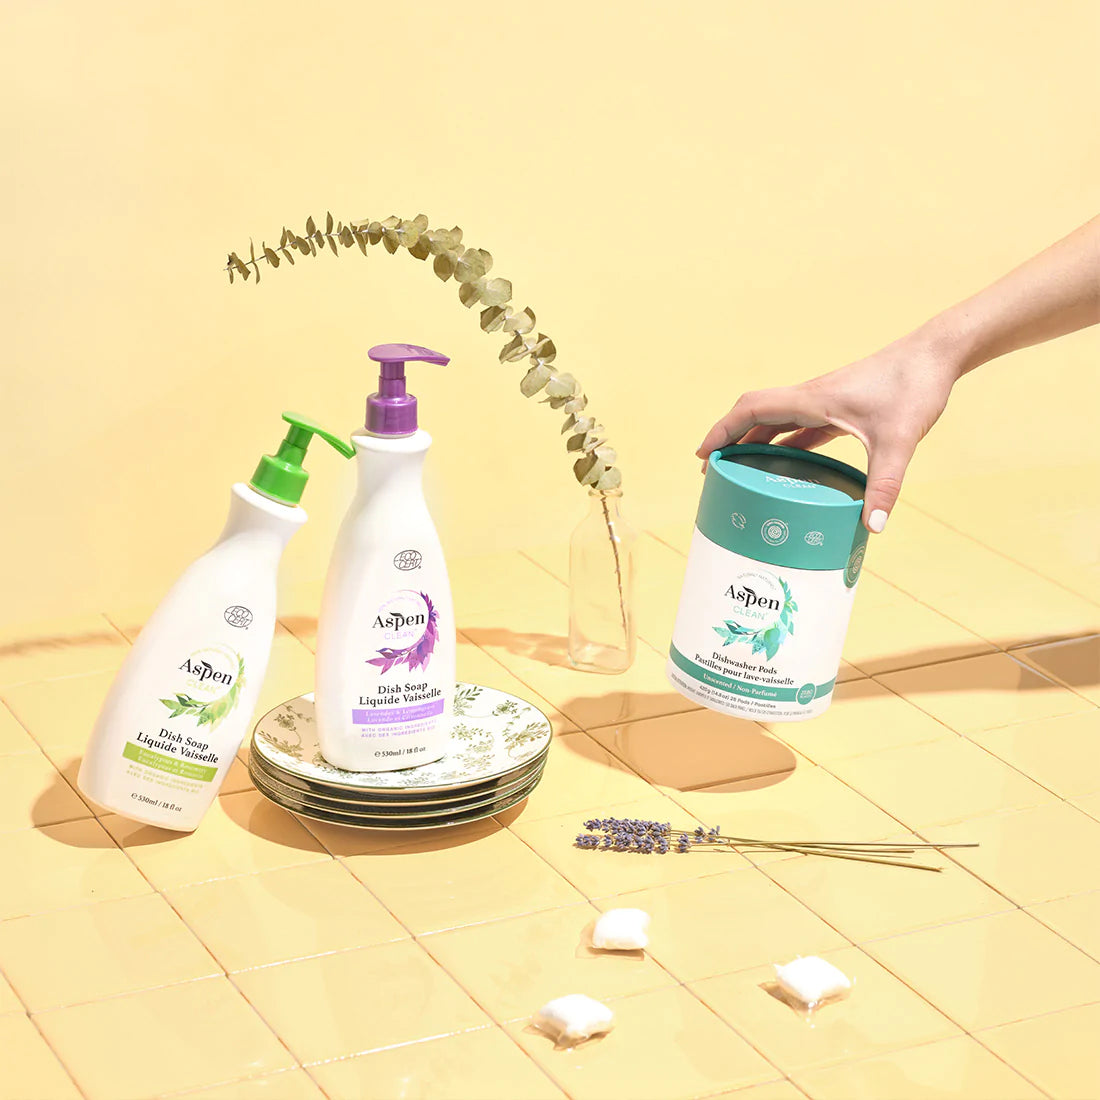 Ecological Dish Soap by AspenClean